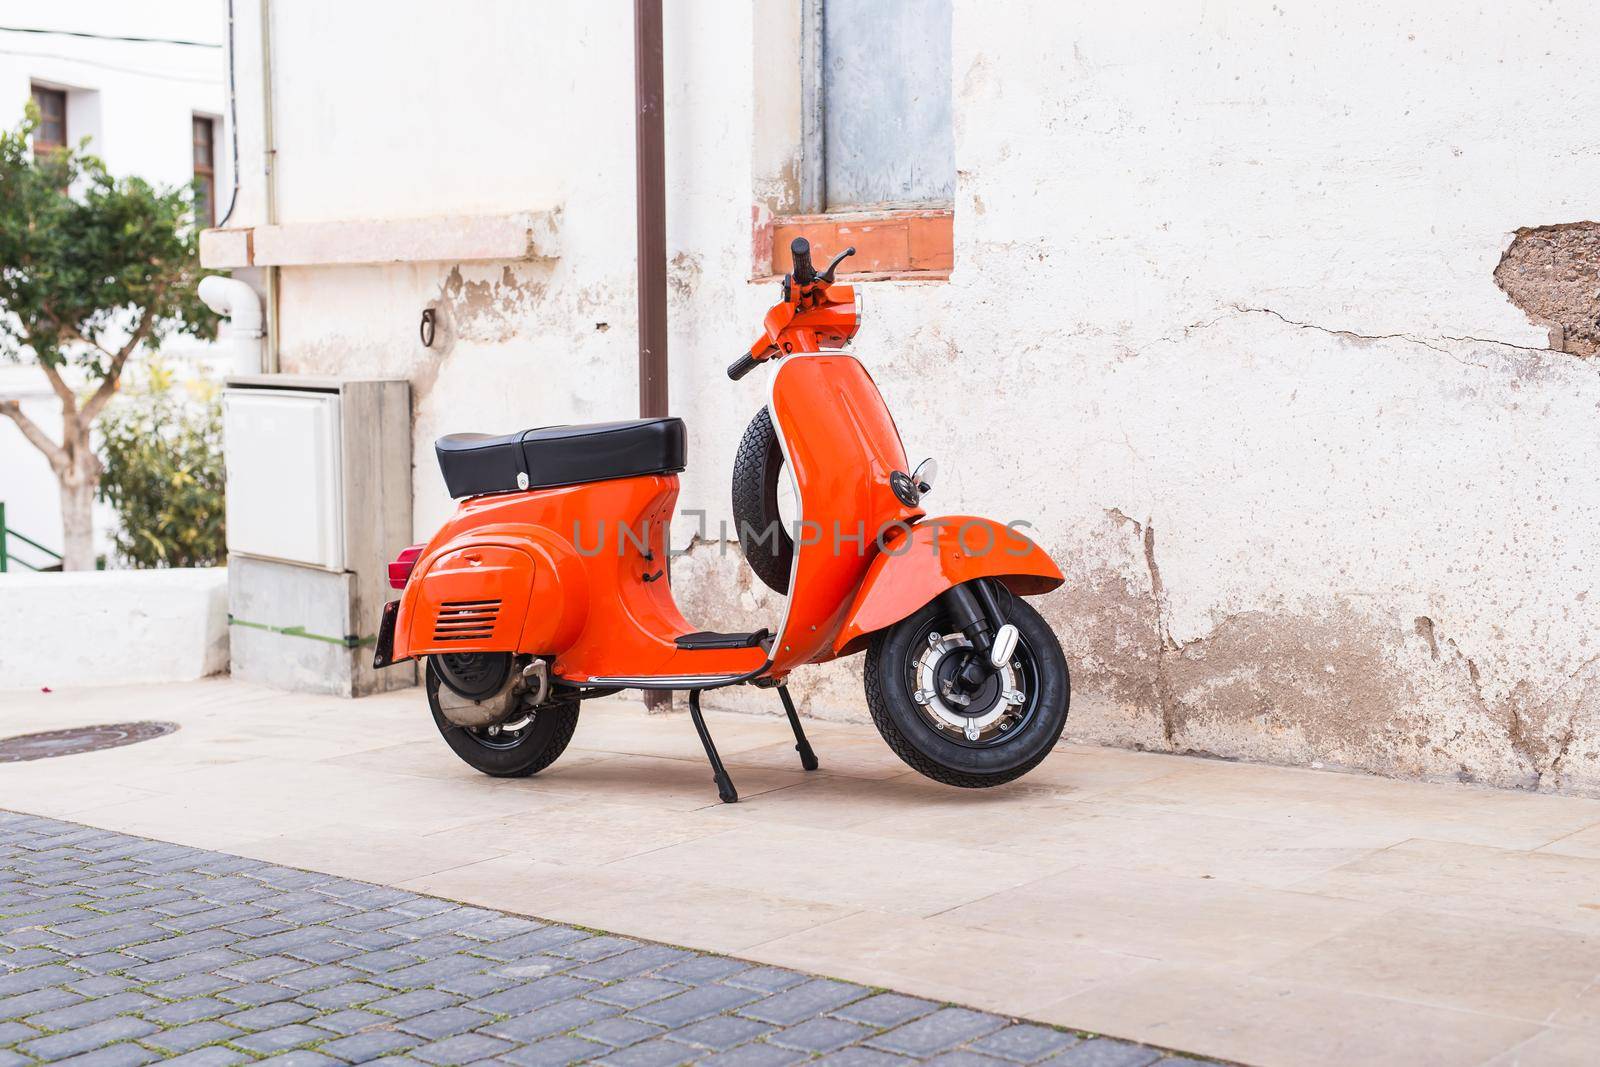 Orange Scooter Vespa parked on old street in Barcelona, Spain by Satura86